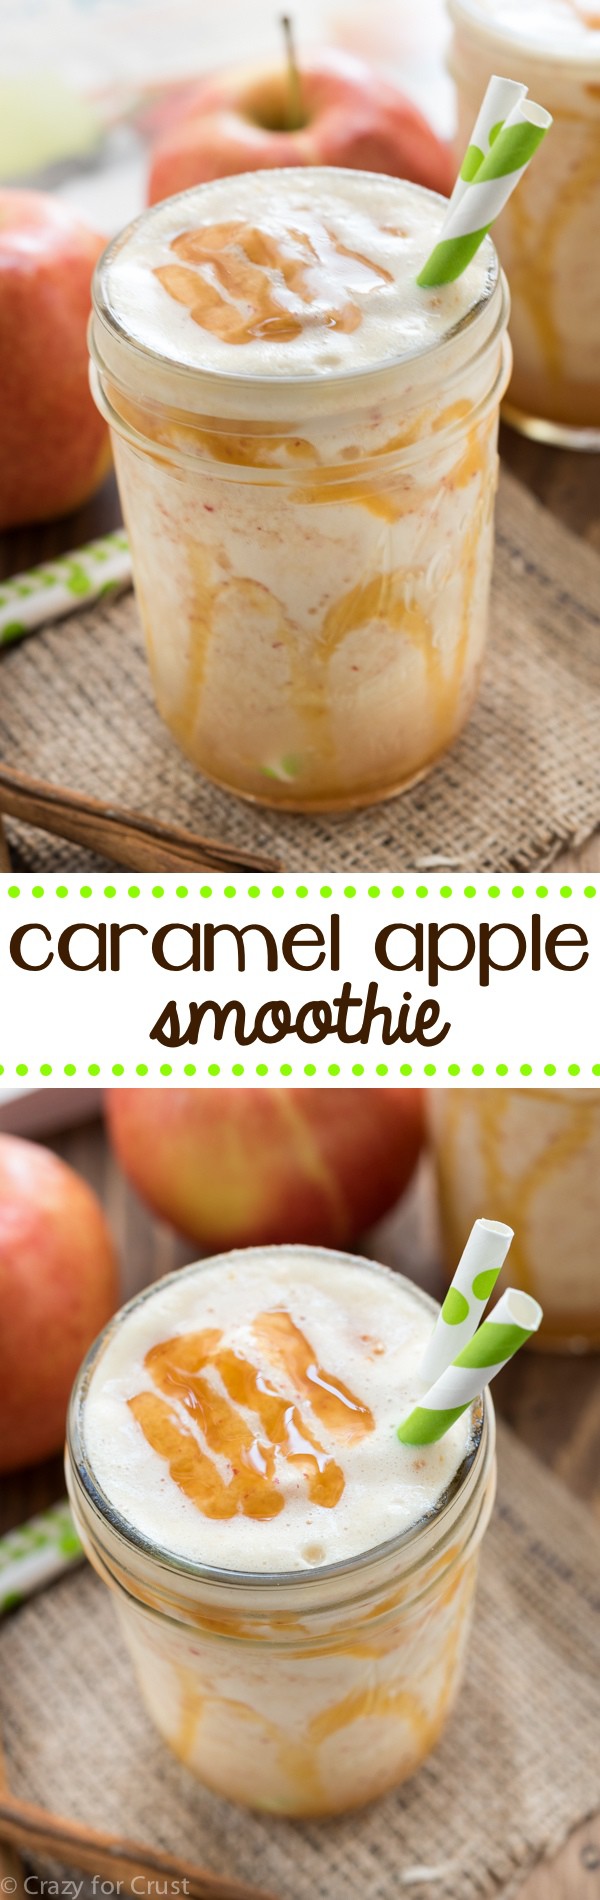 Caramel Apple Smoothie Recipe - an easy smoothie full of fall flavors. No added sugar, can be made dairy free! The perfect smoothie for kids.